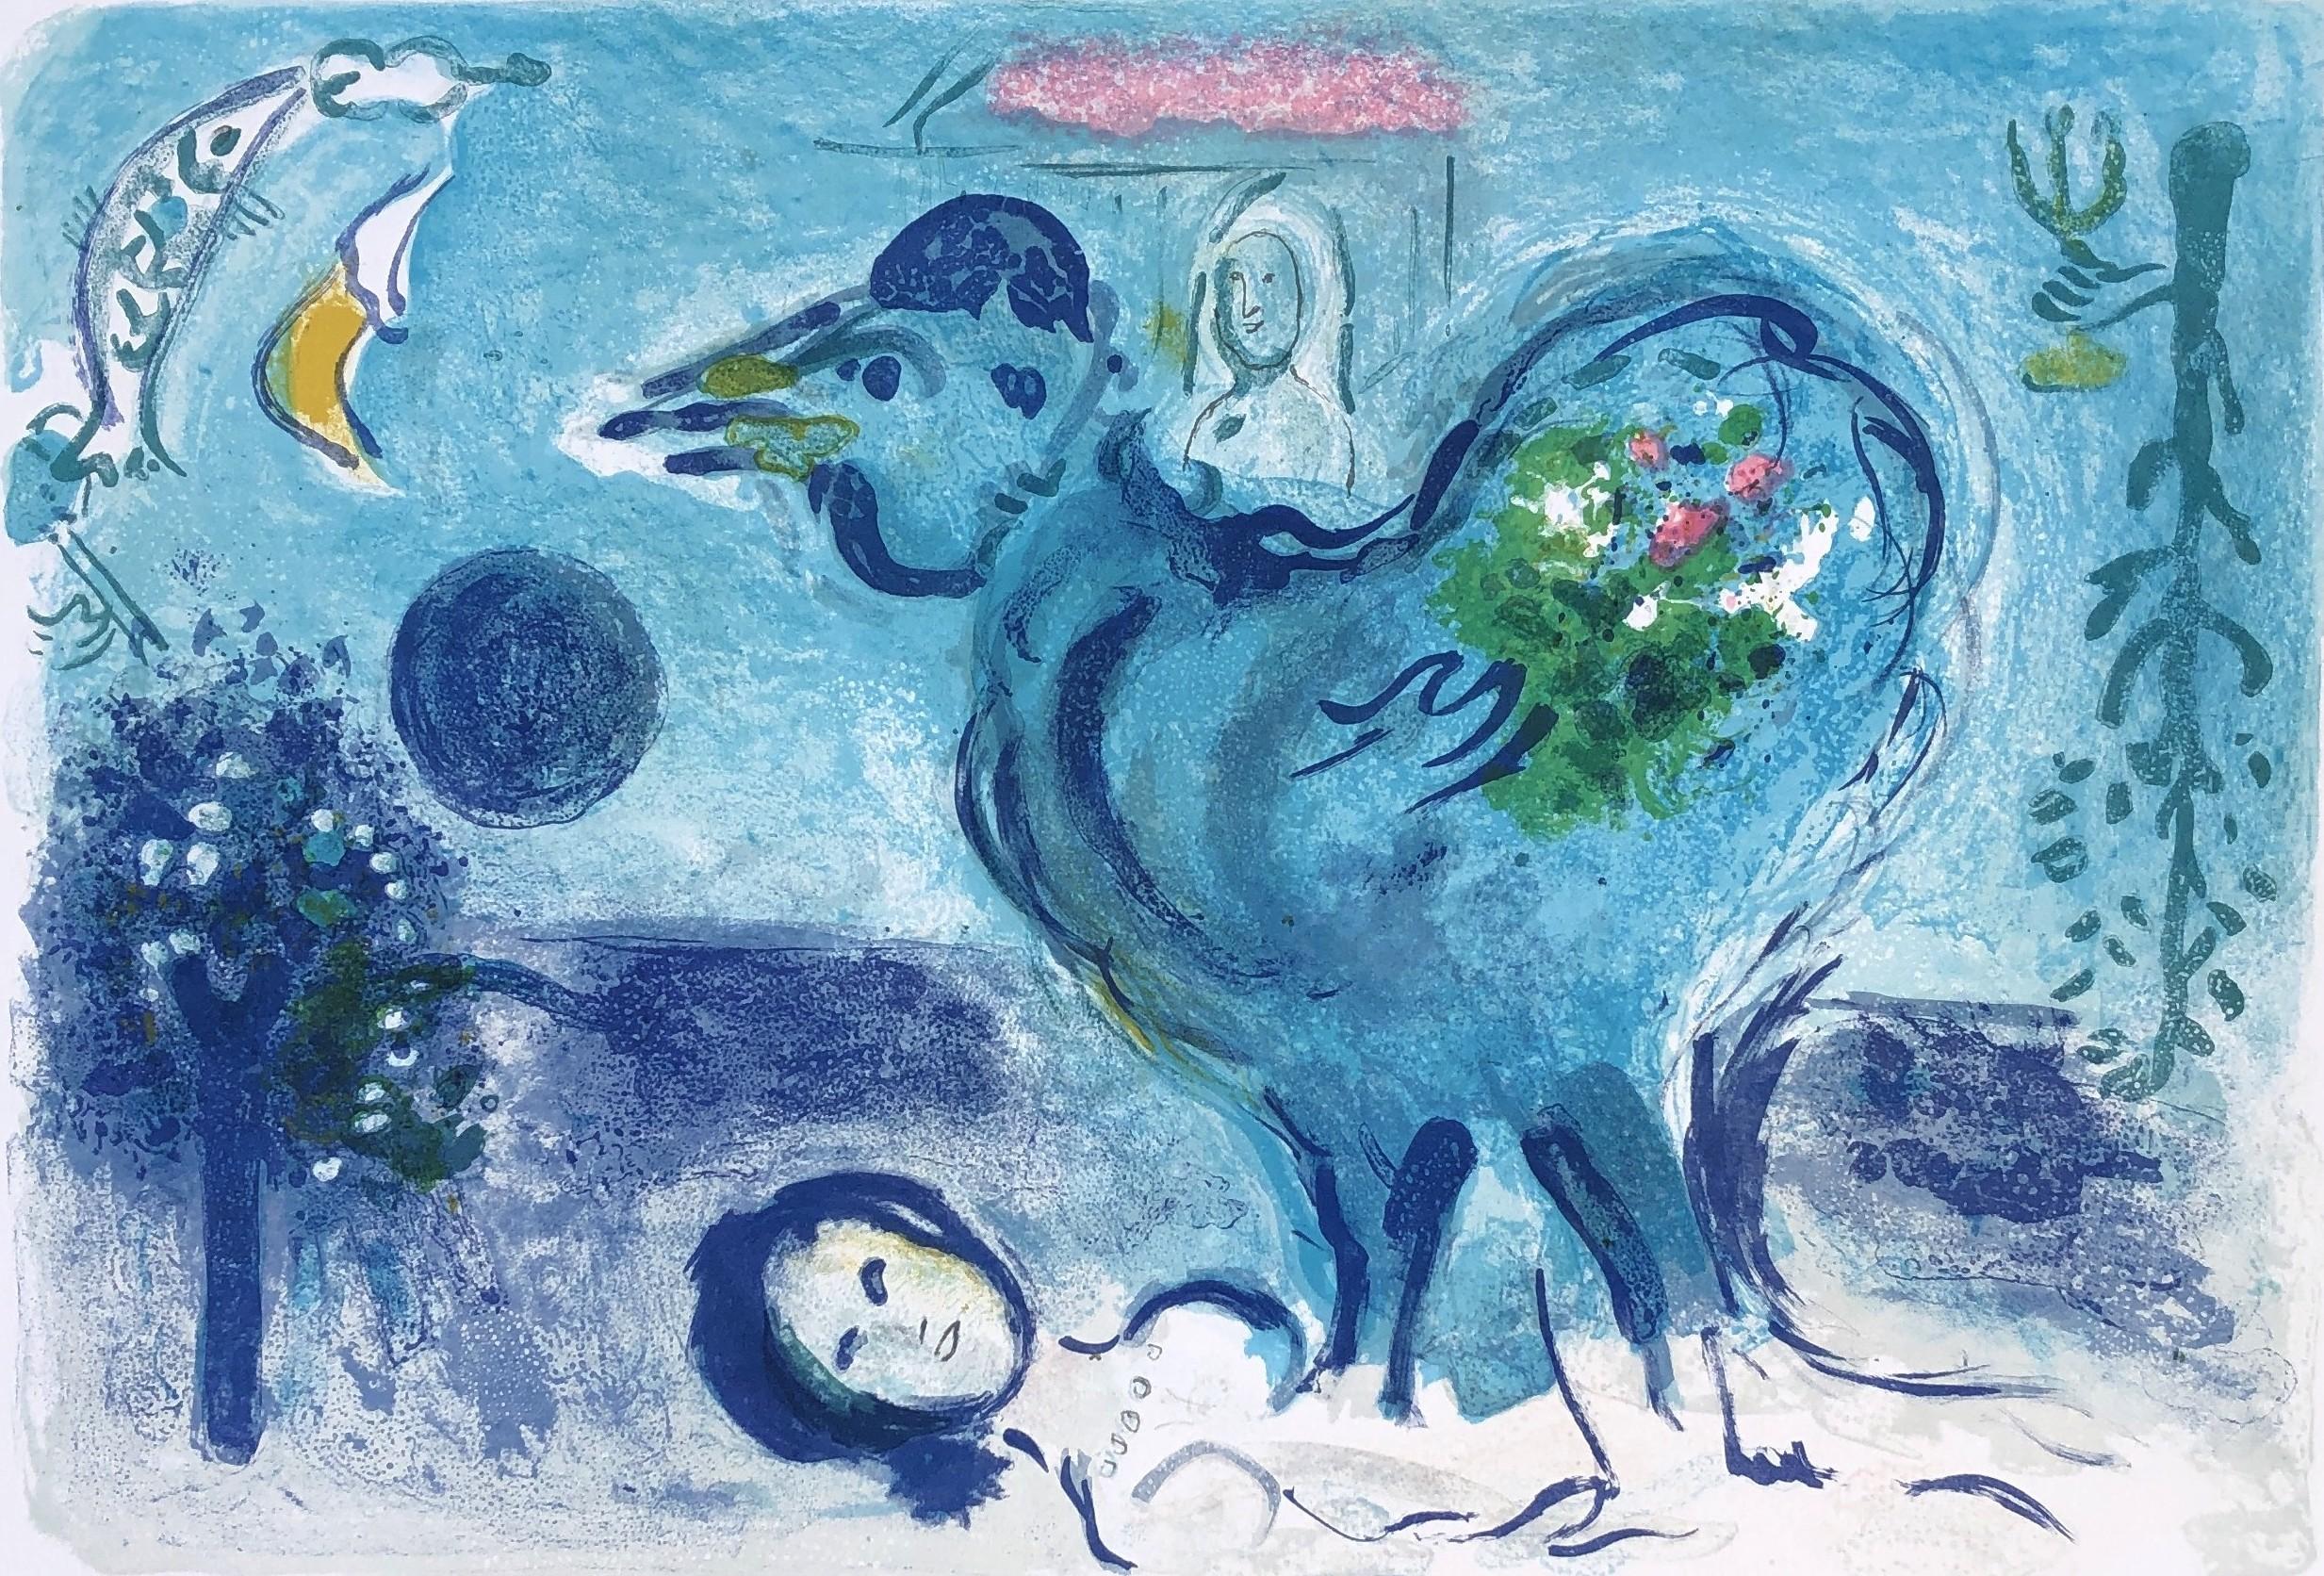 Landscape With Rooster - Original Lithograph Handsigned (Mourlot #208) - Print by Marc Chagall